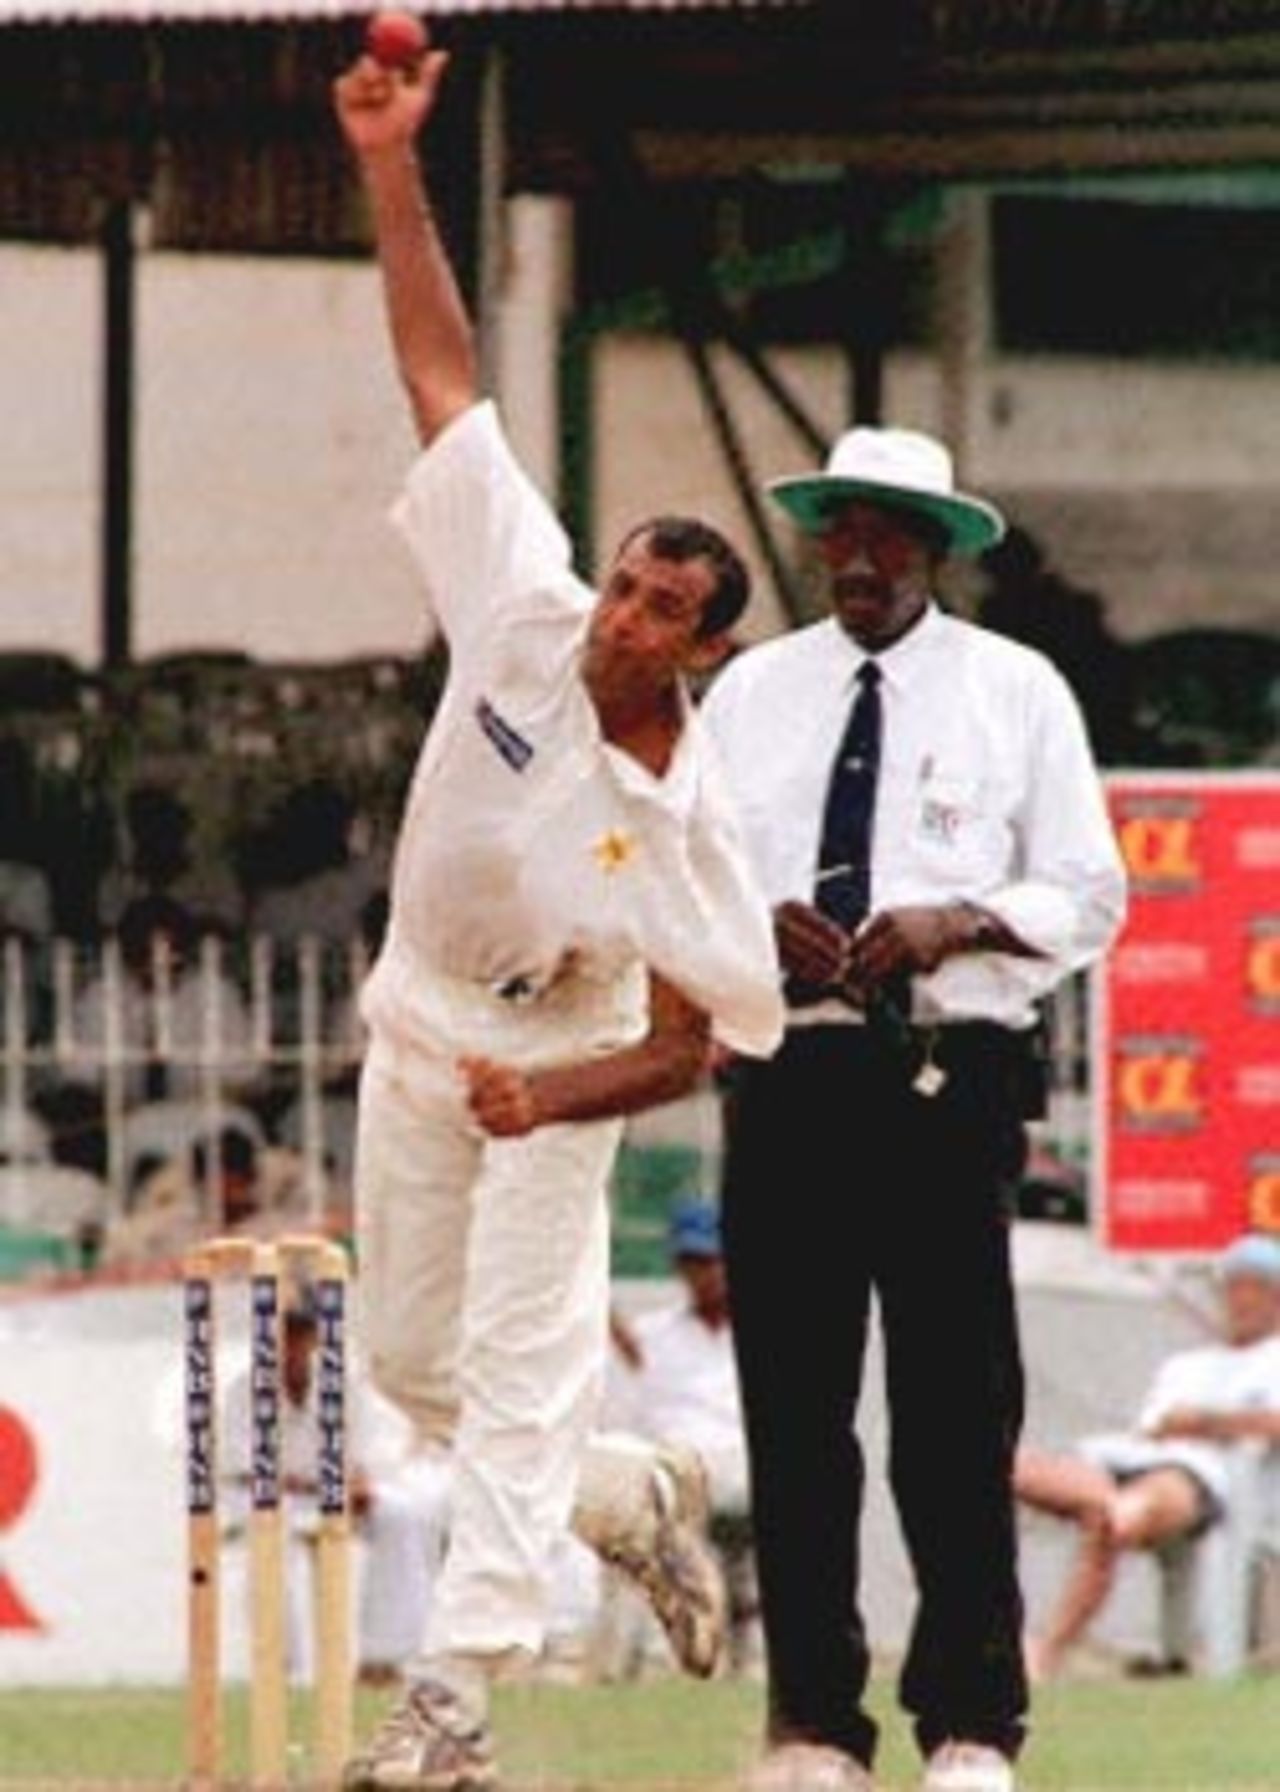 Pakistan bowler Arshad Khan on his way to collecting three wickets in the first test against Sri Lanka. Pakistan won by five wickets with a full day's play to spare. Pakistan in Sri Lanka, 1999/00, 1st Test, Sri Lanka v Pakistan, Sinhalese Sports Club Ground, Colombo 14-18 June 2000 (Day 4).